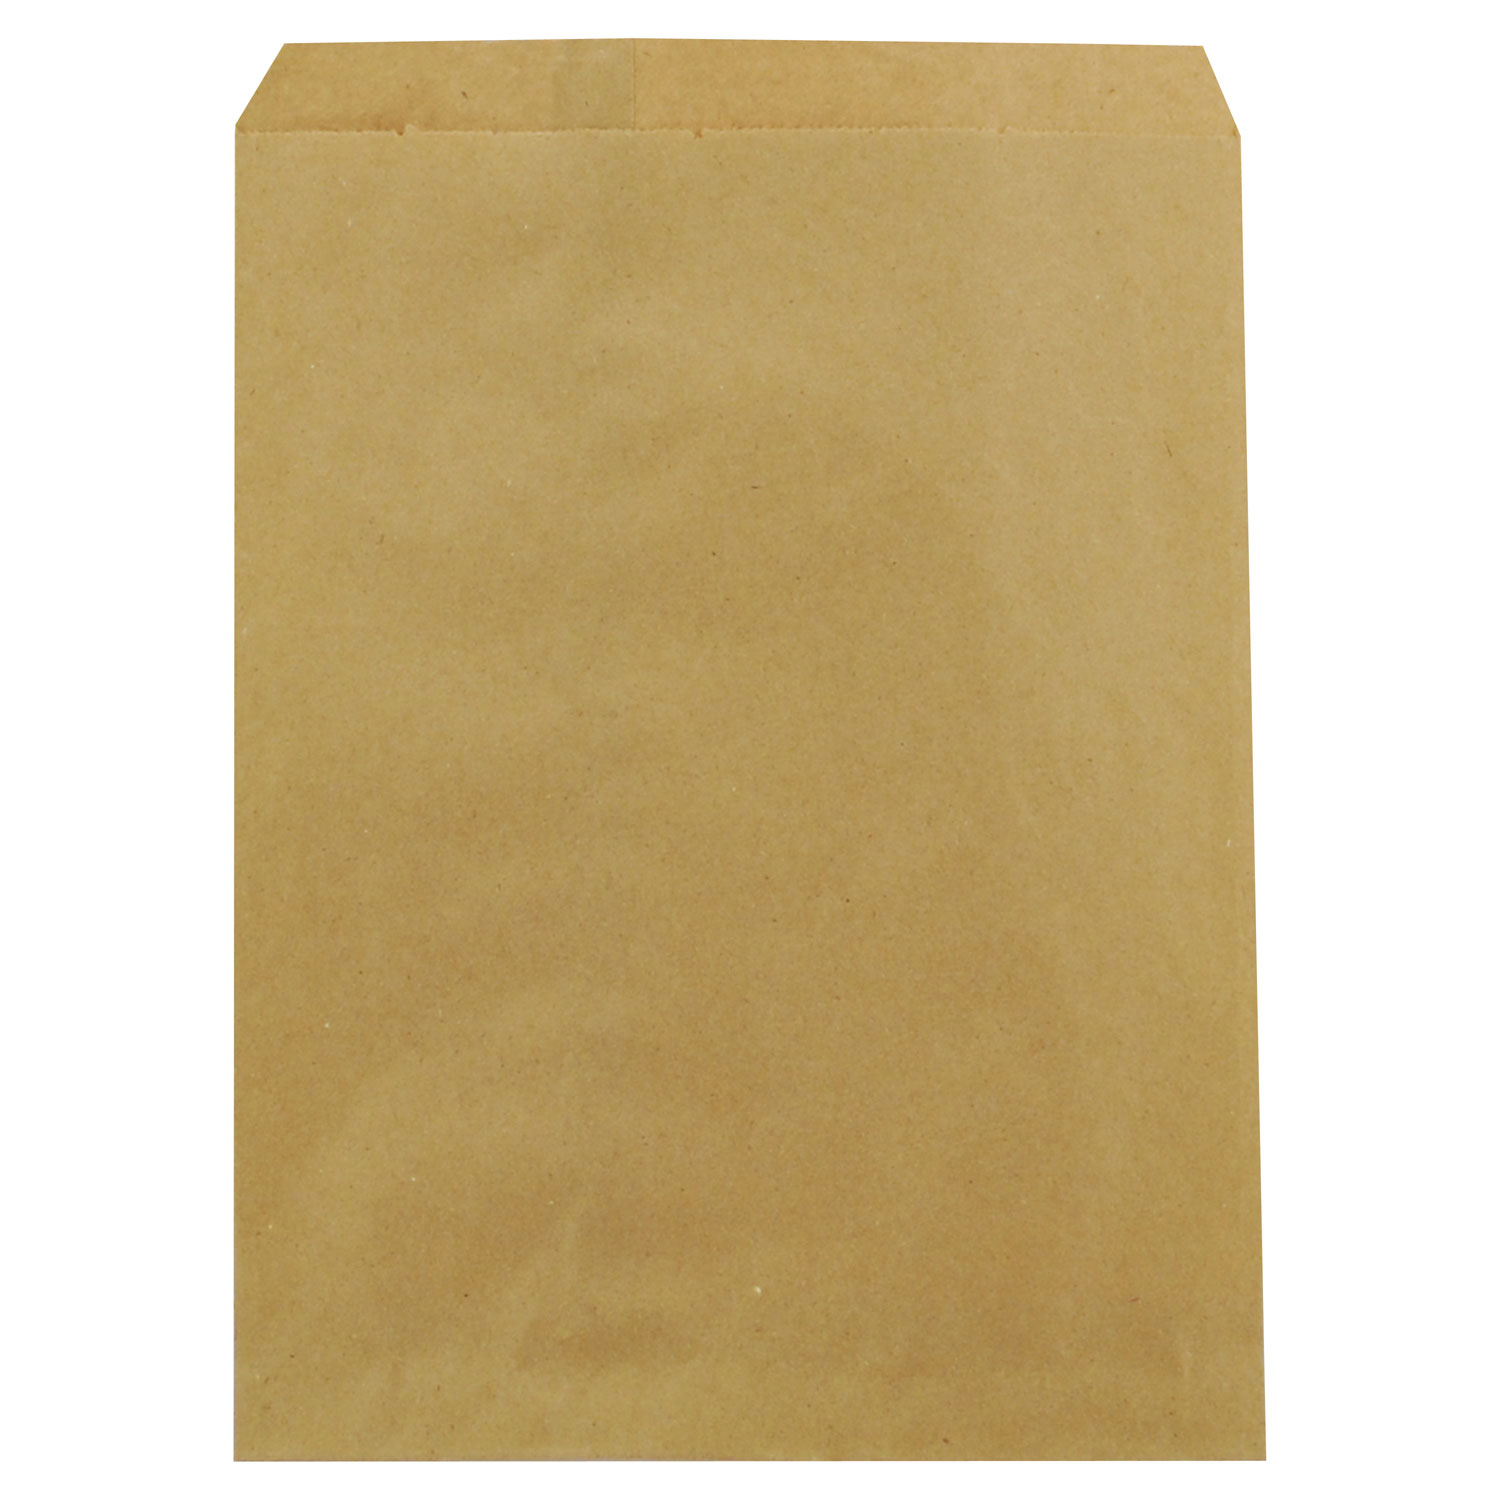 Strong Paper Carrier Bags - Kraft Paper - Strong Eco-Friendly